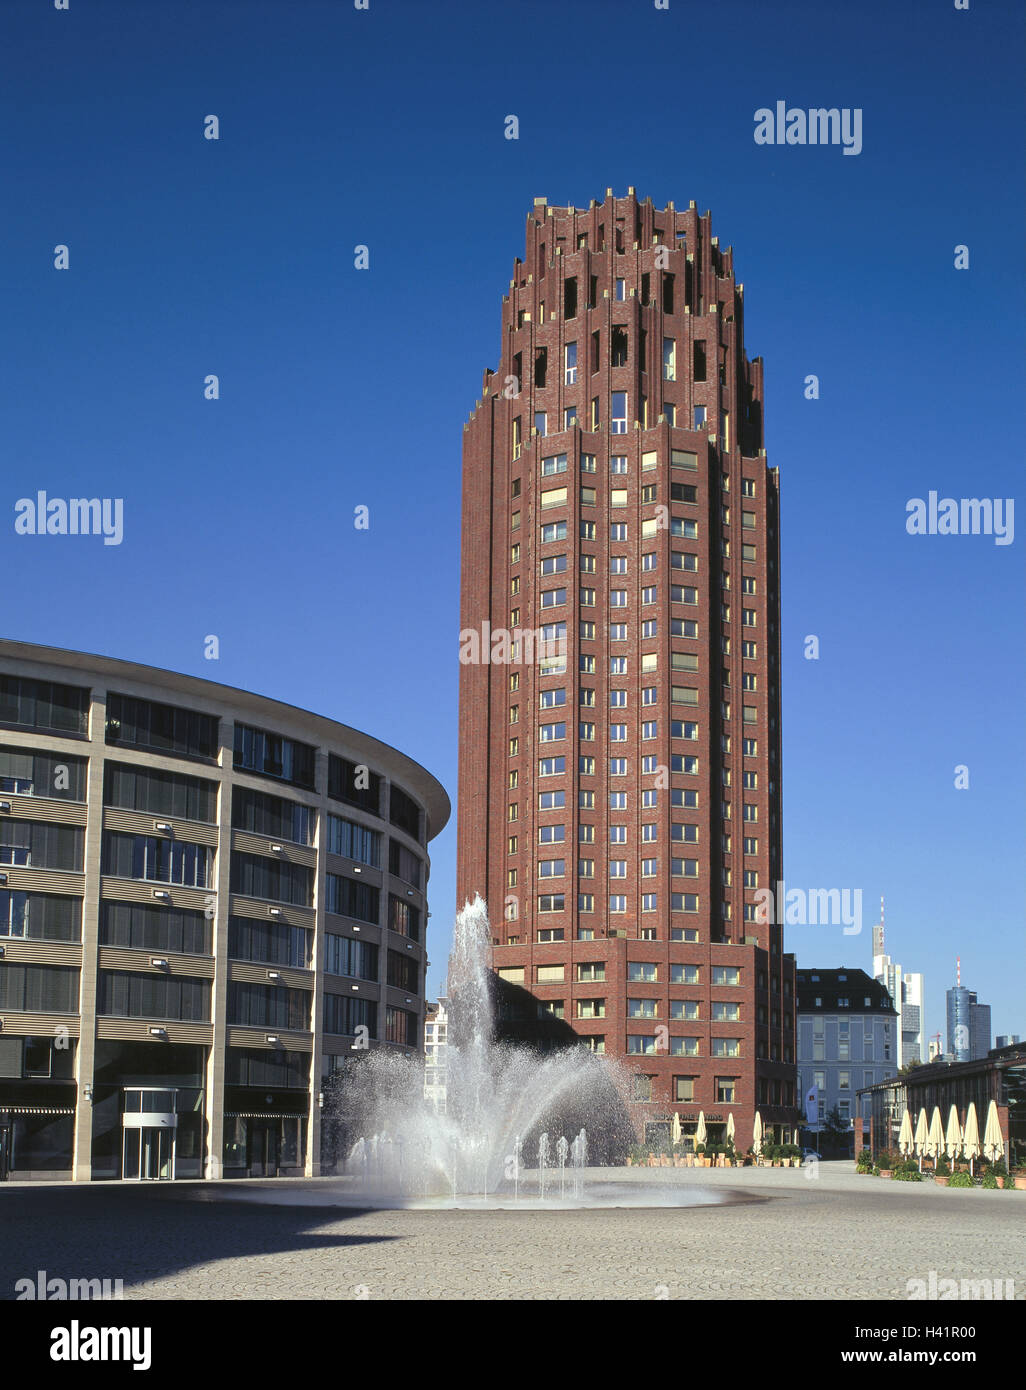 Germany, Hessen, Frankfurt on the Main, the Main plaza Tower, Height 88 m, fountains high rise, hotel, builds in 2001, architect Hans Kollhoff, building, architecture, architectural style, postmodern romanticism, Stock Photo